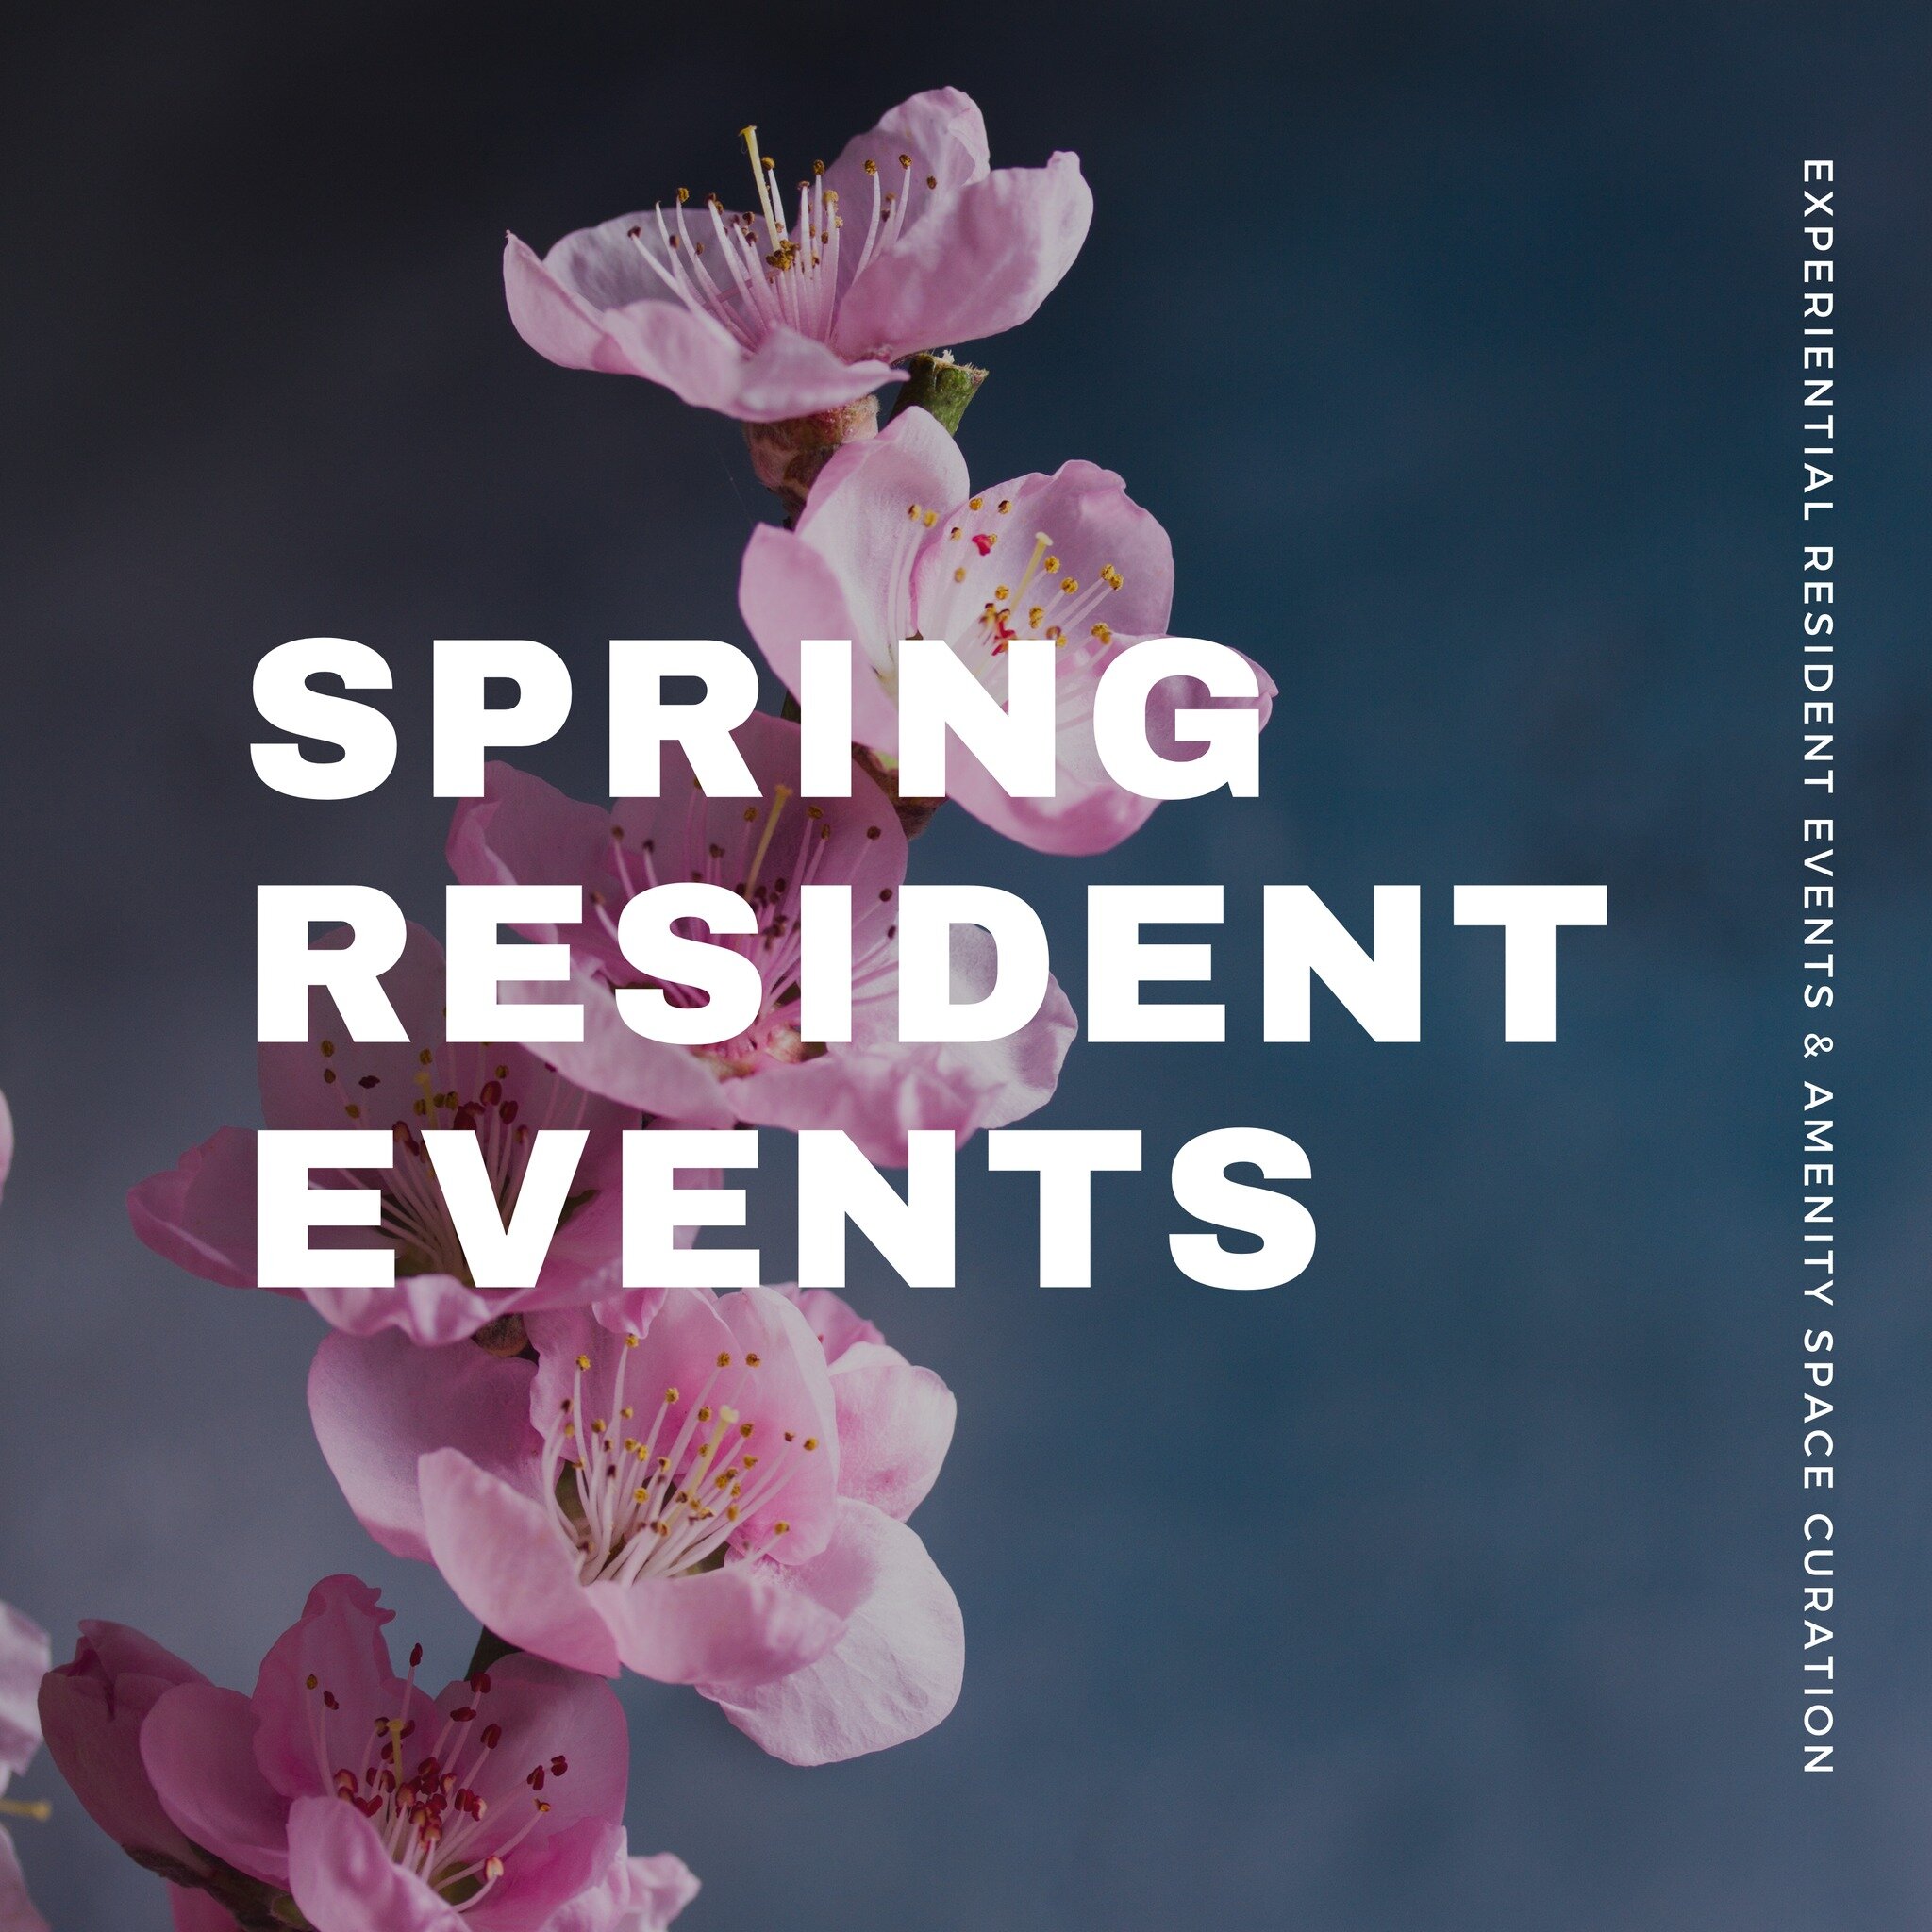 Happy first day of spring! 🌸 We have some fun events lined up for you including opening day celebrations, sake tastings, cherry blossom happy hours, game nights, terrarium workshops, and more! DMV properties, hit us up for our latest event guide.

#